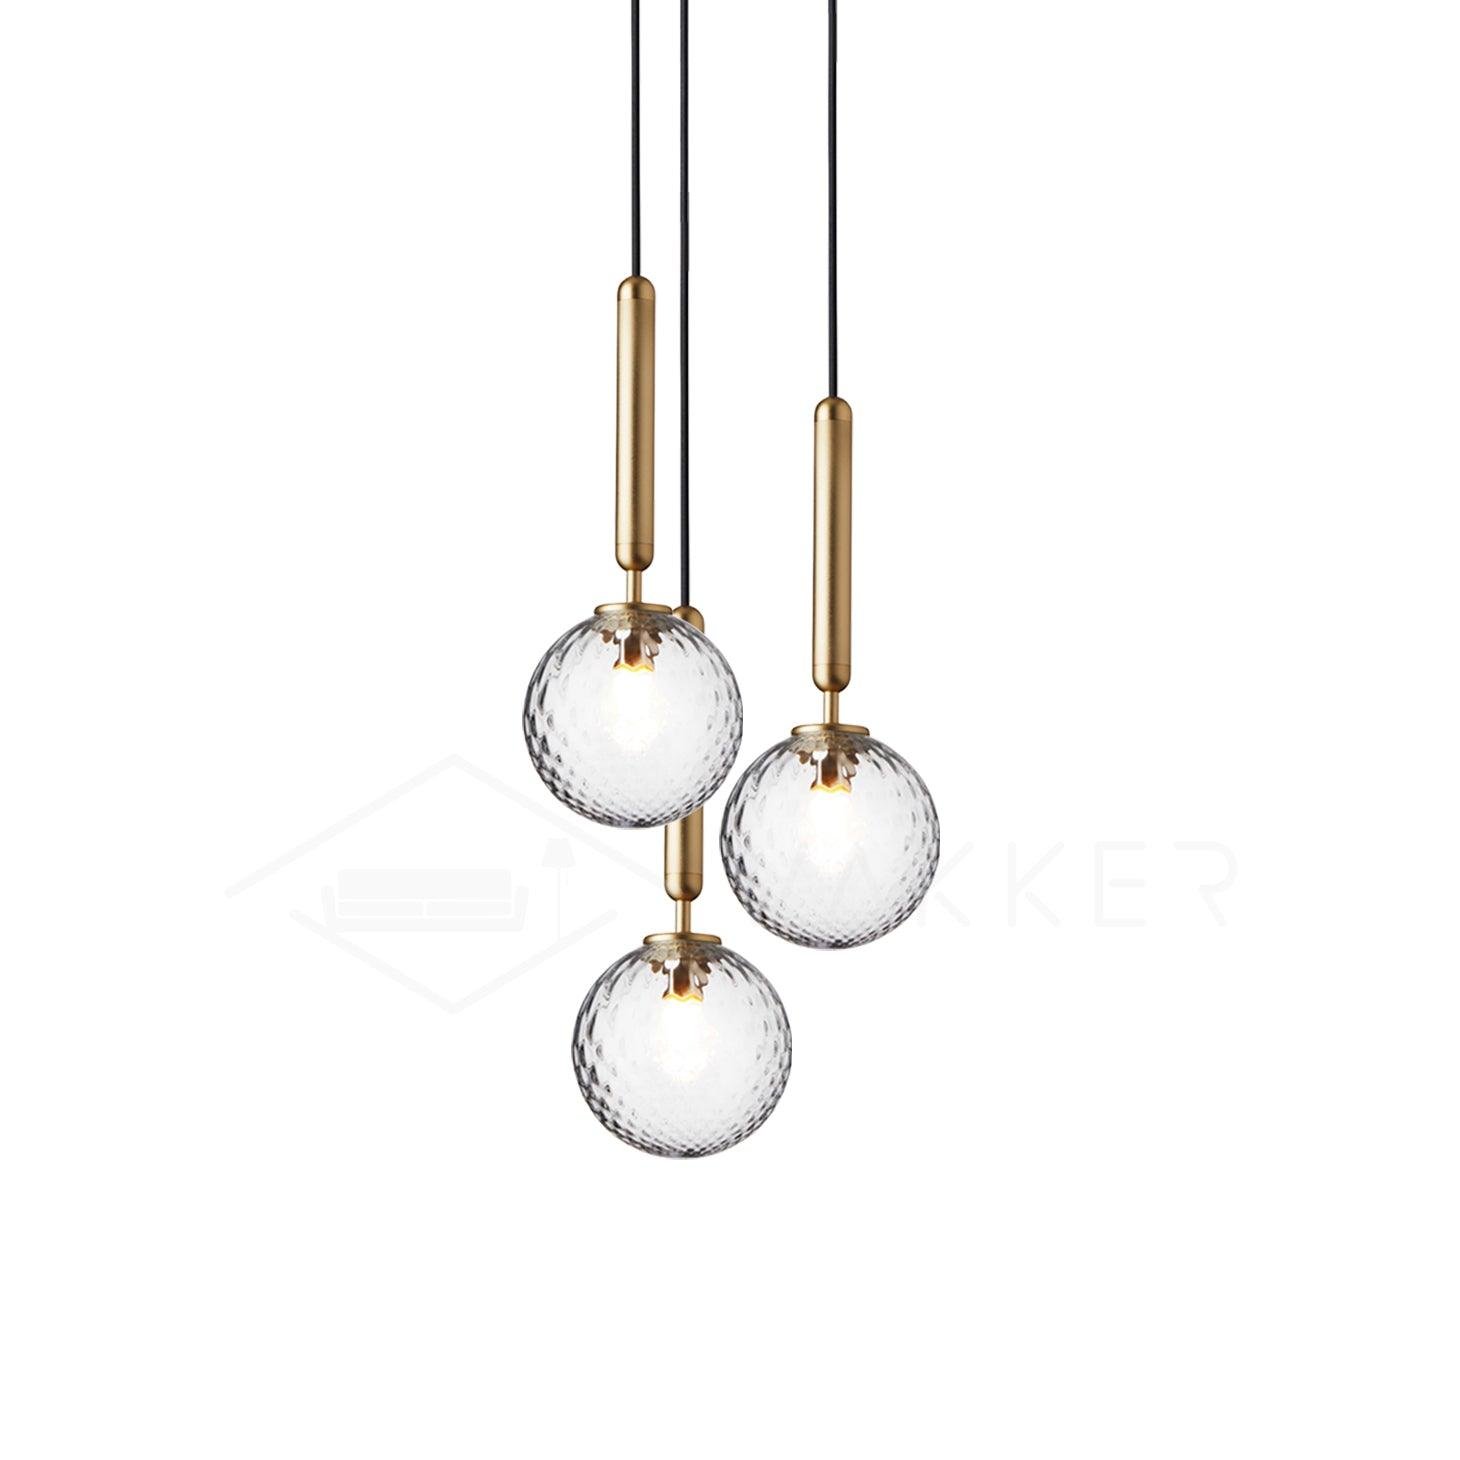 Miira Pendant Light with 3 Heads, measuring 7.9 inches in diameter and 59 inches in height, or 20cm in diameter and 150cm in height. The pendant light is available in a gold finish with a clear appearance.